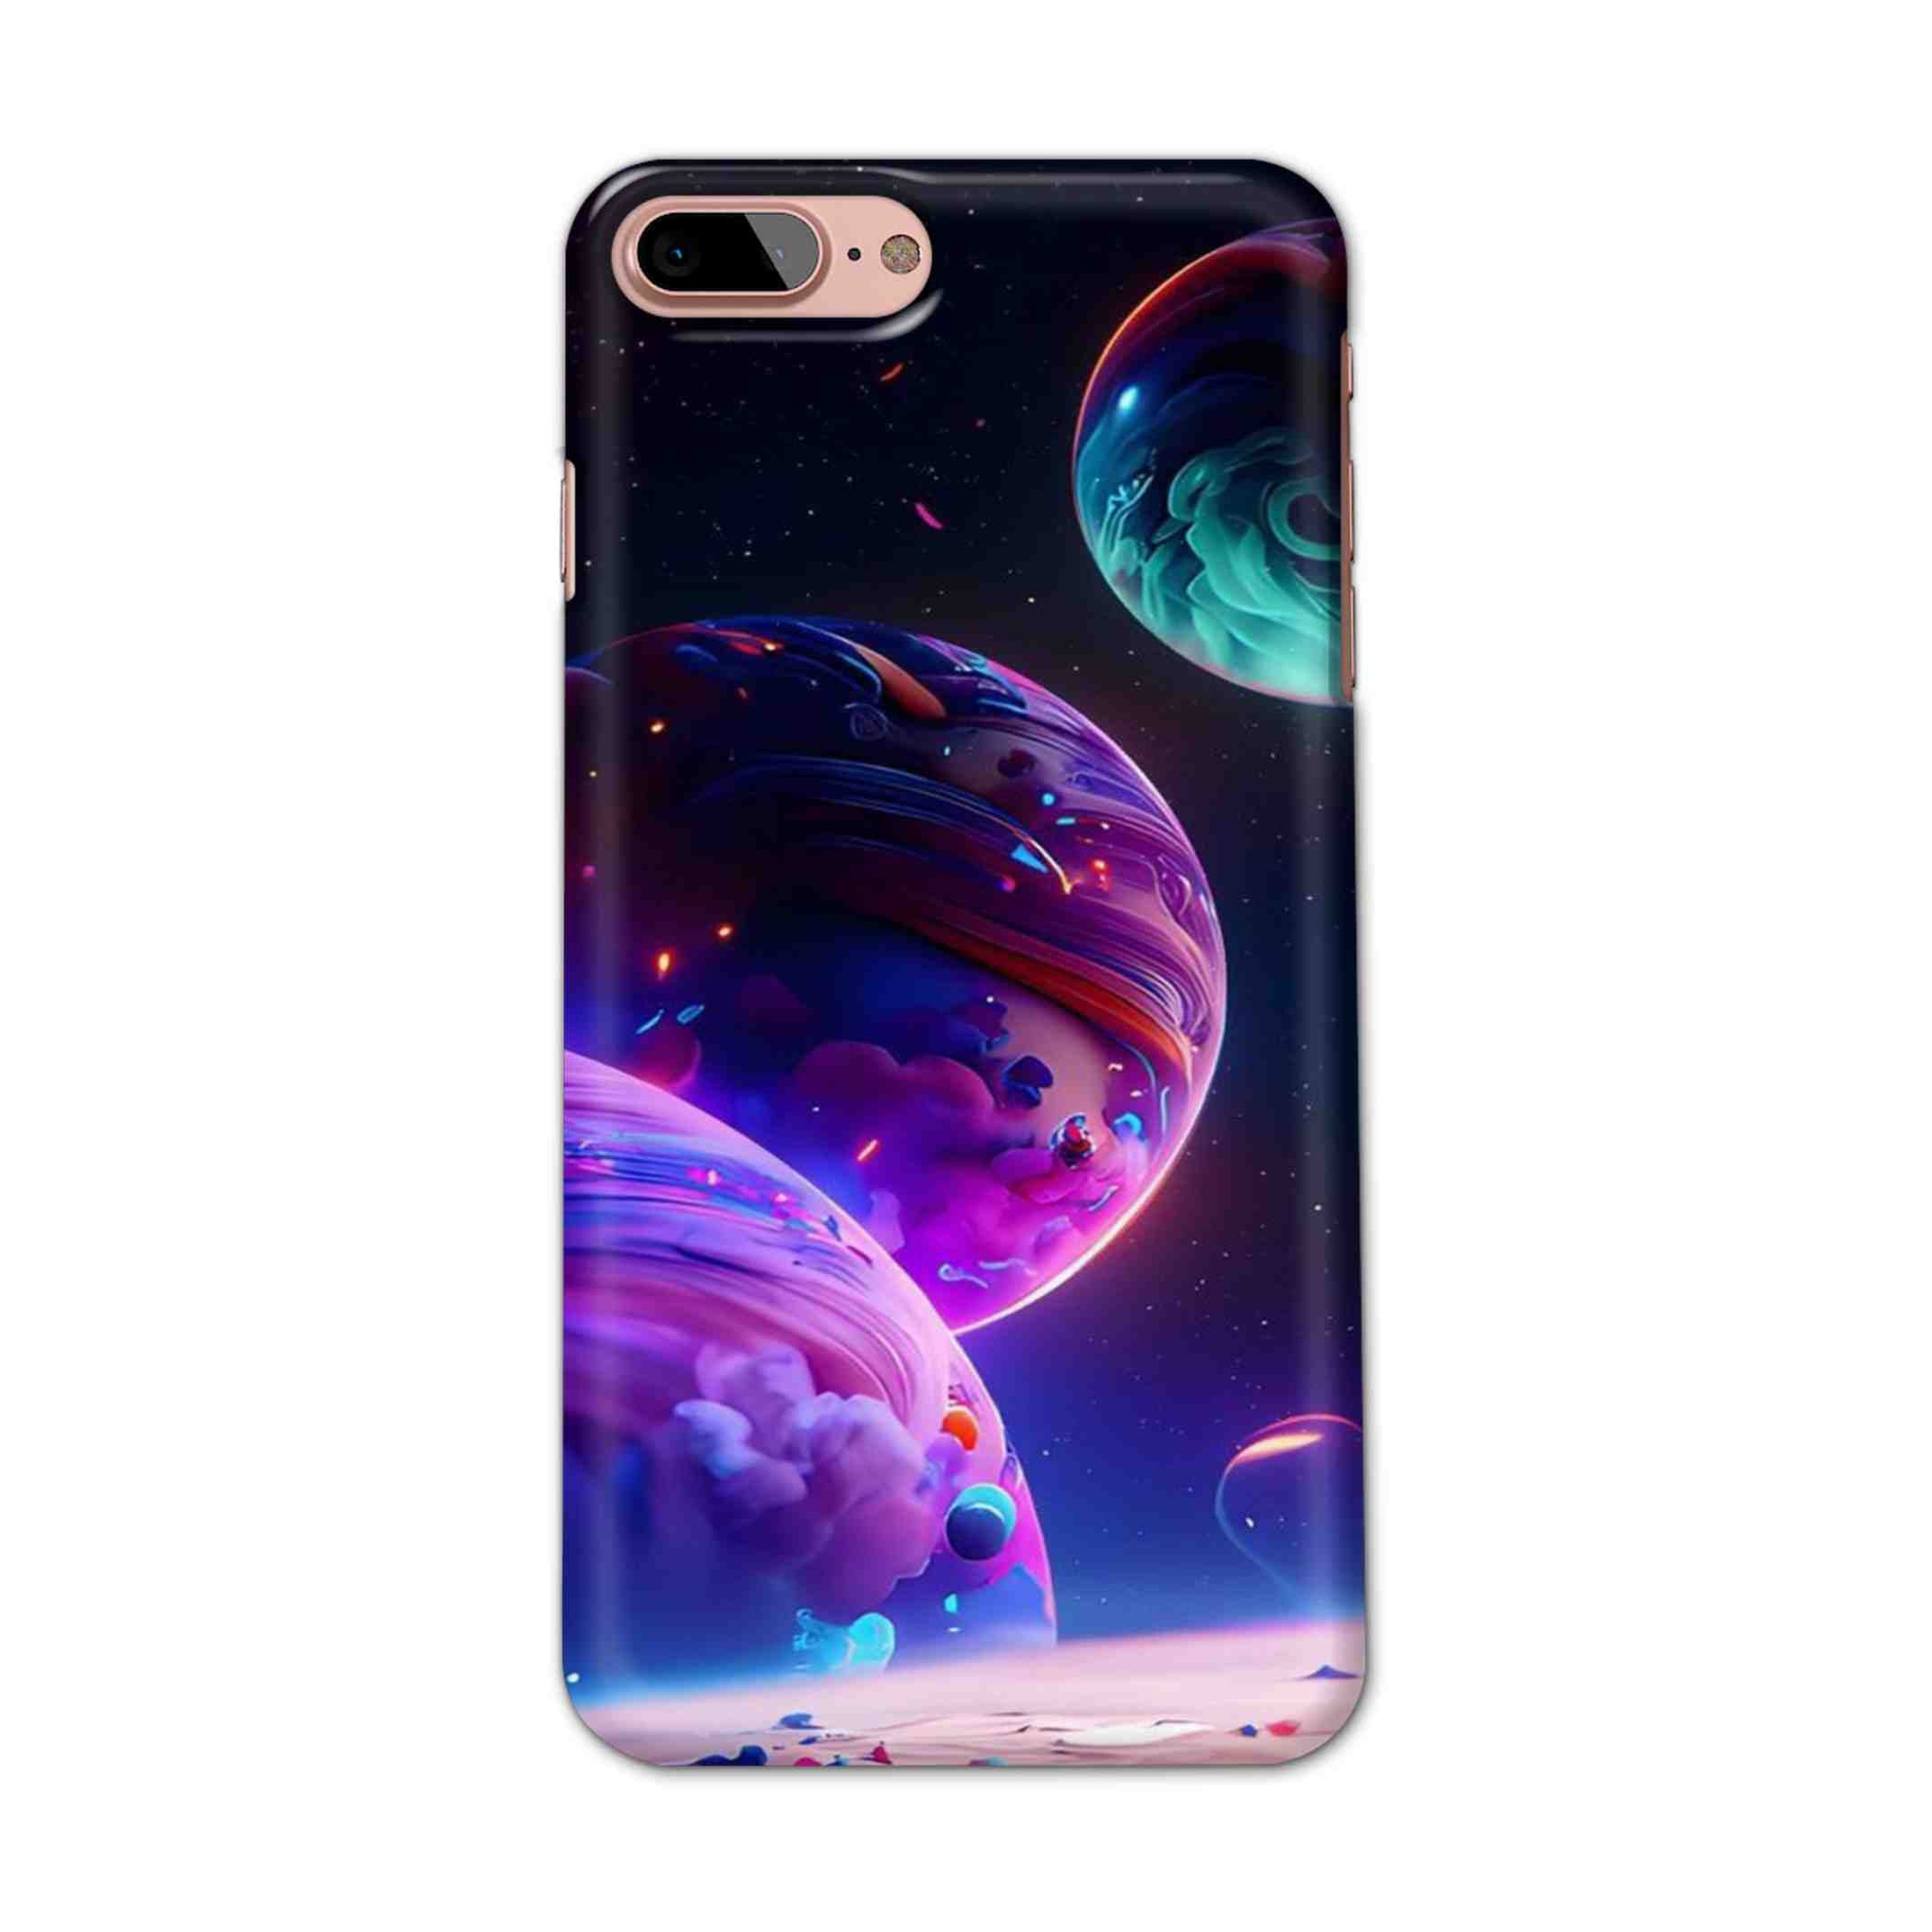 Buy 3 Earth Hard Back Mobile Phone Case/Cover For iPhone 7 Plus / 8 Plus Online